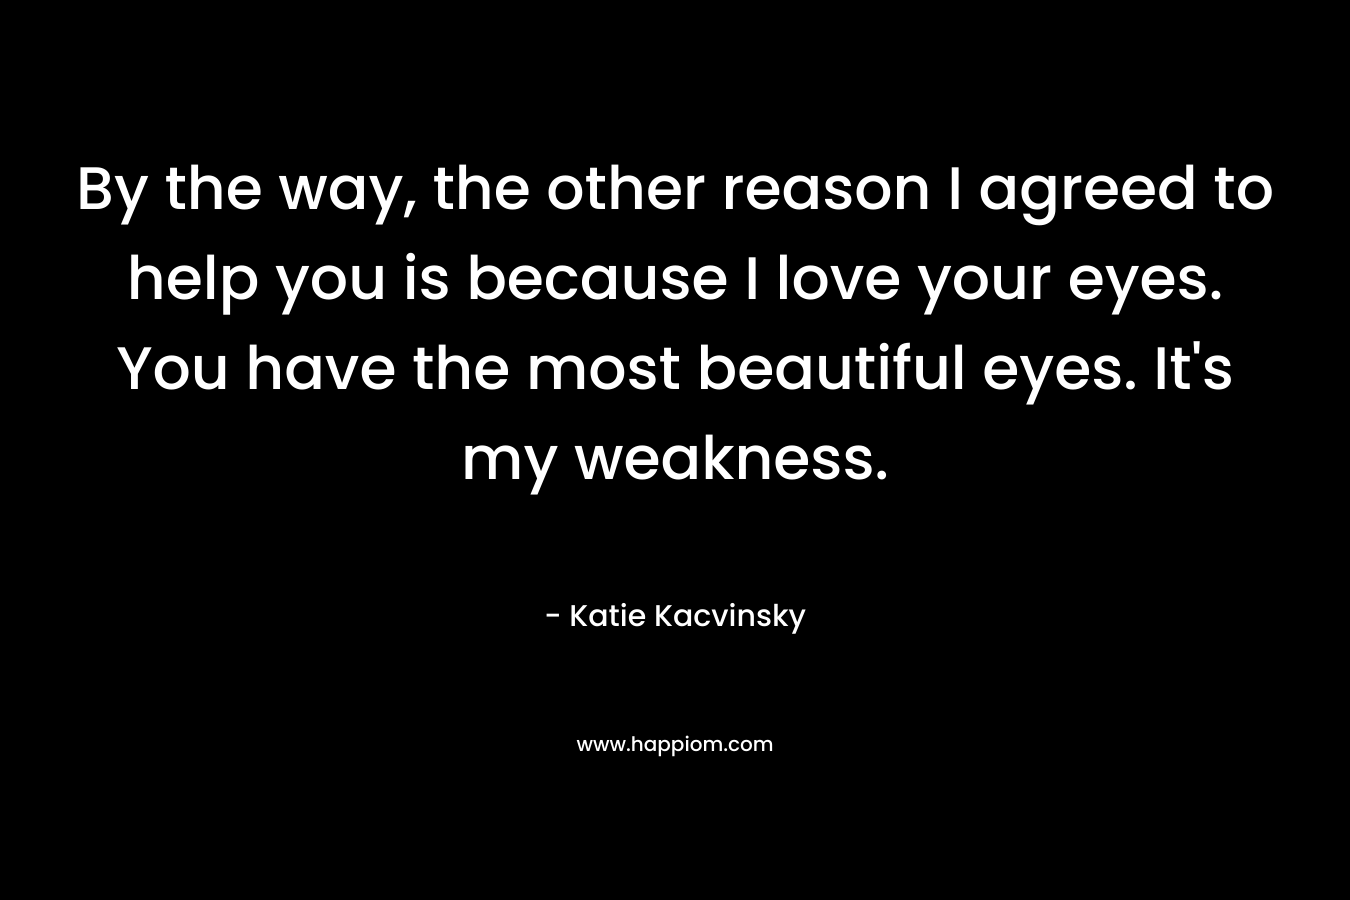 By the way, the other reason I agreed to help you is because I love your eyes. You have the most beautiful eyes. It’s my weakness. – Katie Kacvinsky